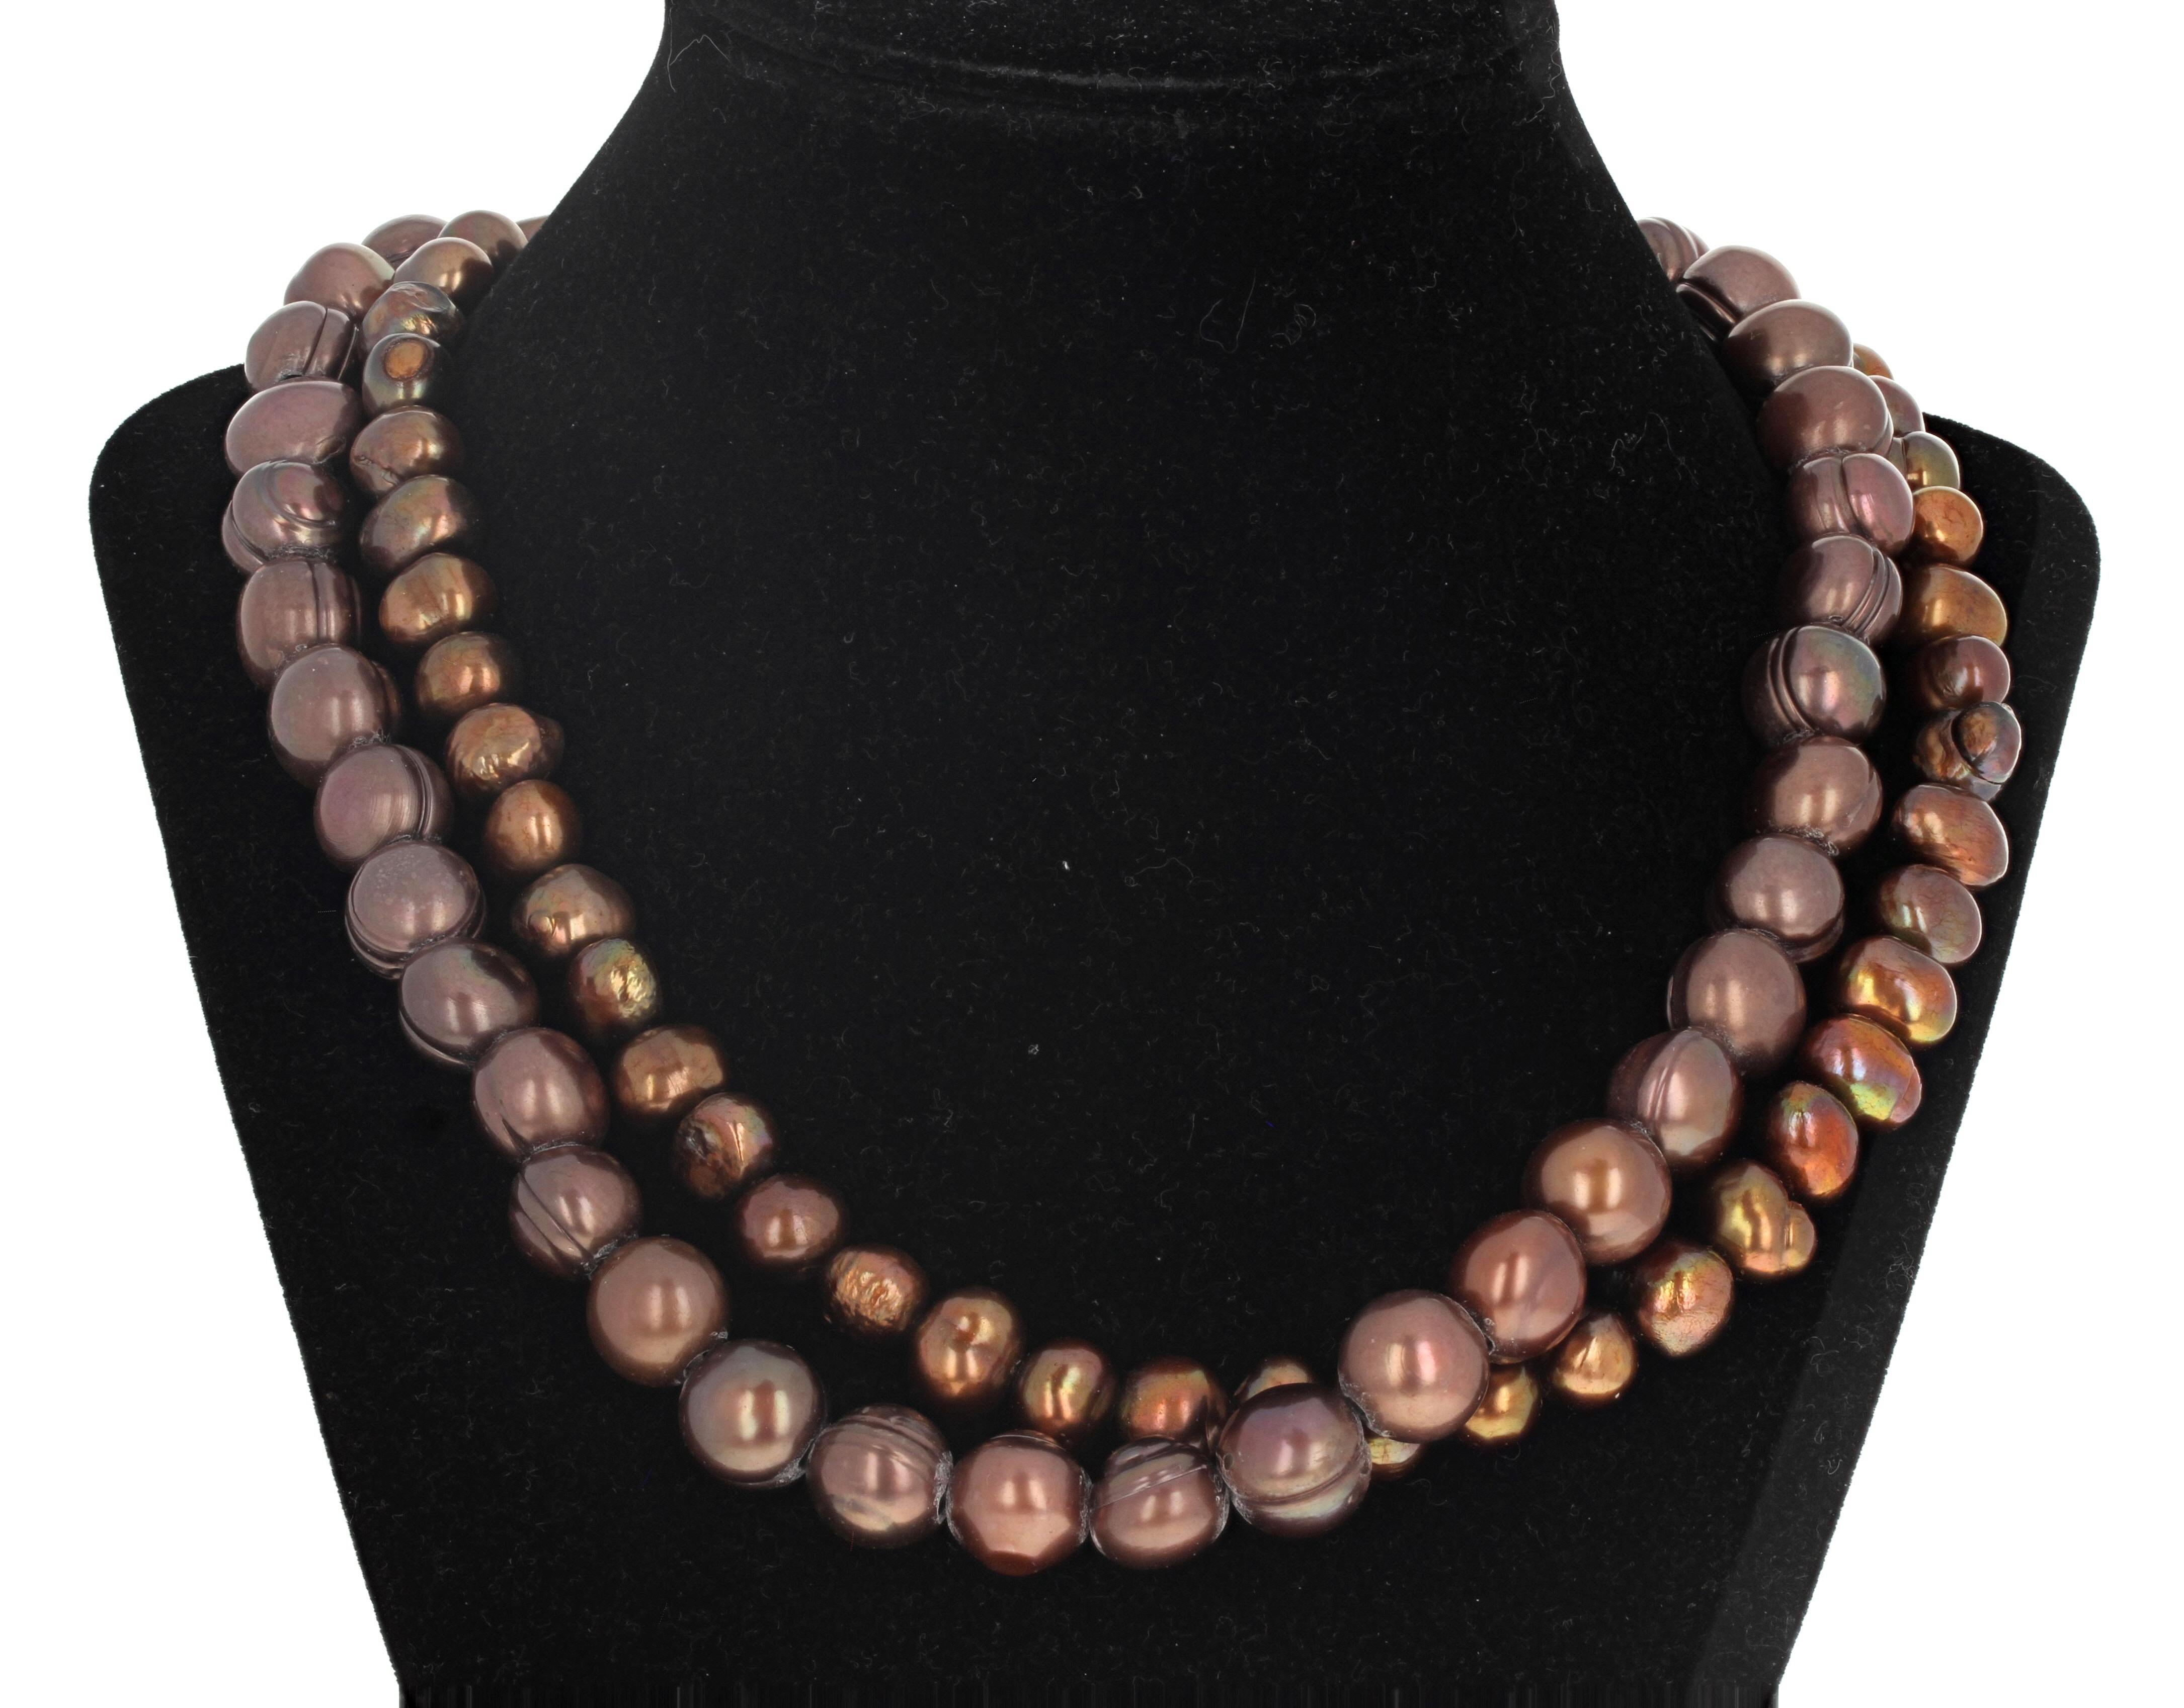 Women's or Men's AJD Double Strand of Magnificently Glowing Natural Cultured Pearls 19